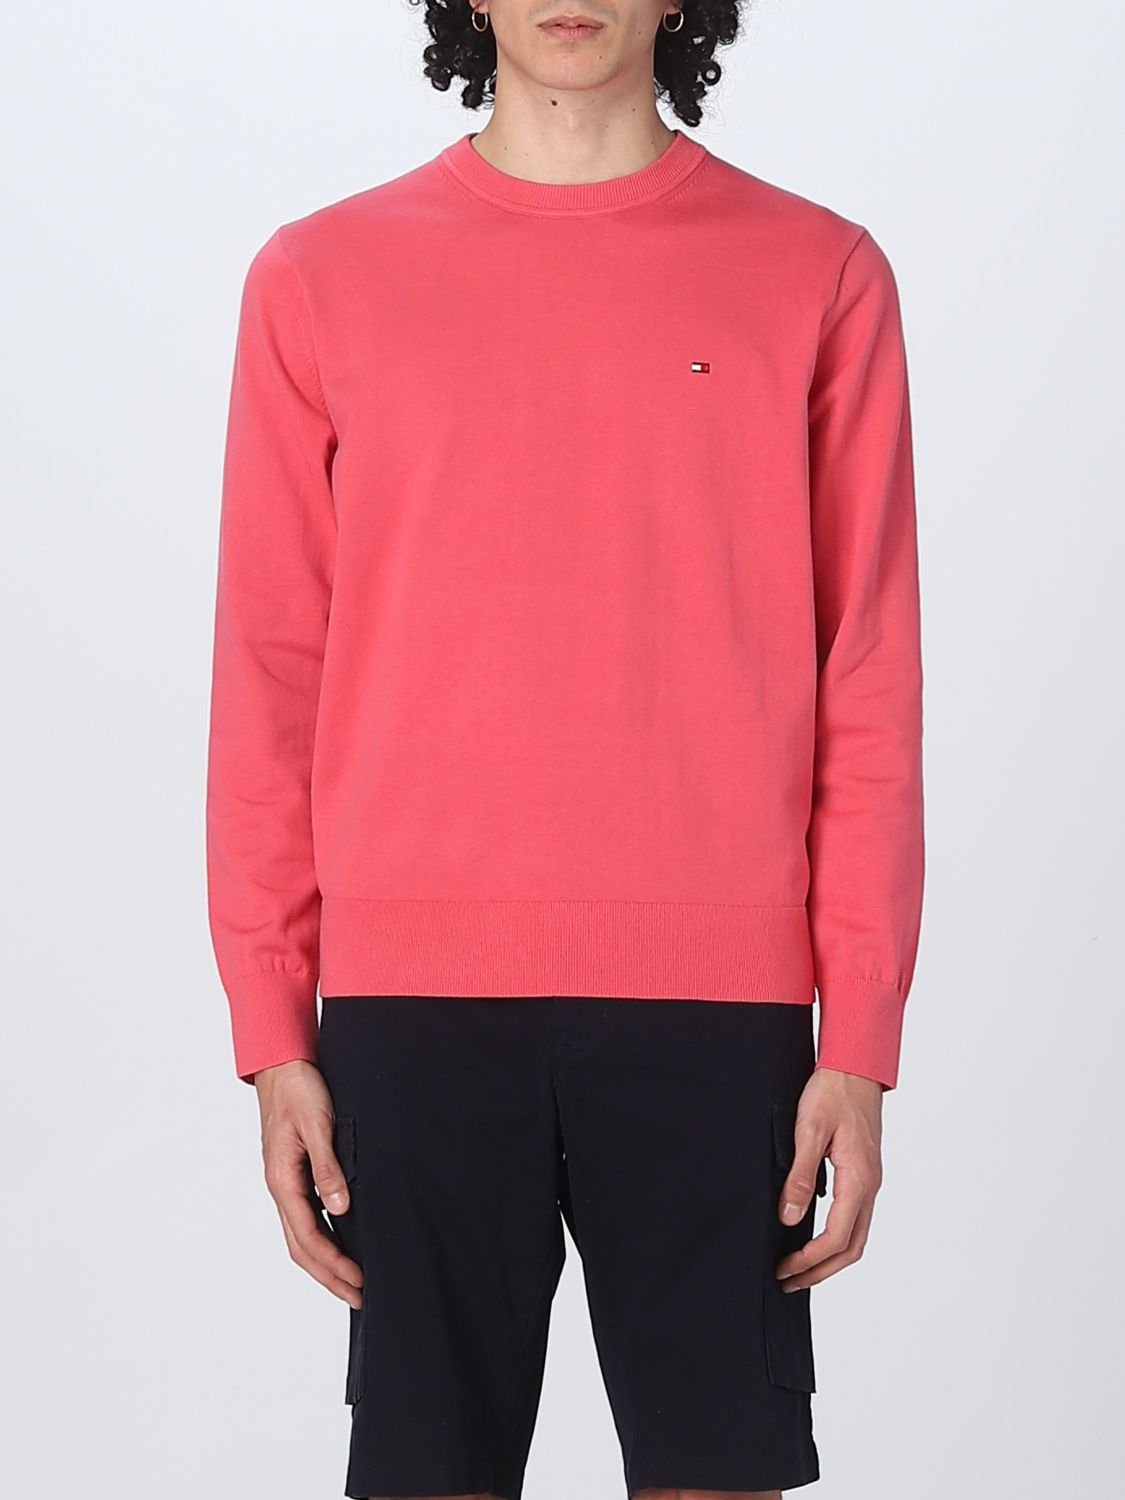 TOMMY HILFIGER: sweater for man - Red | Tommy Hilfiger sweater ...